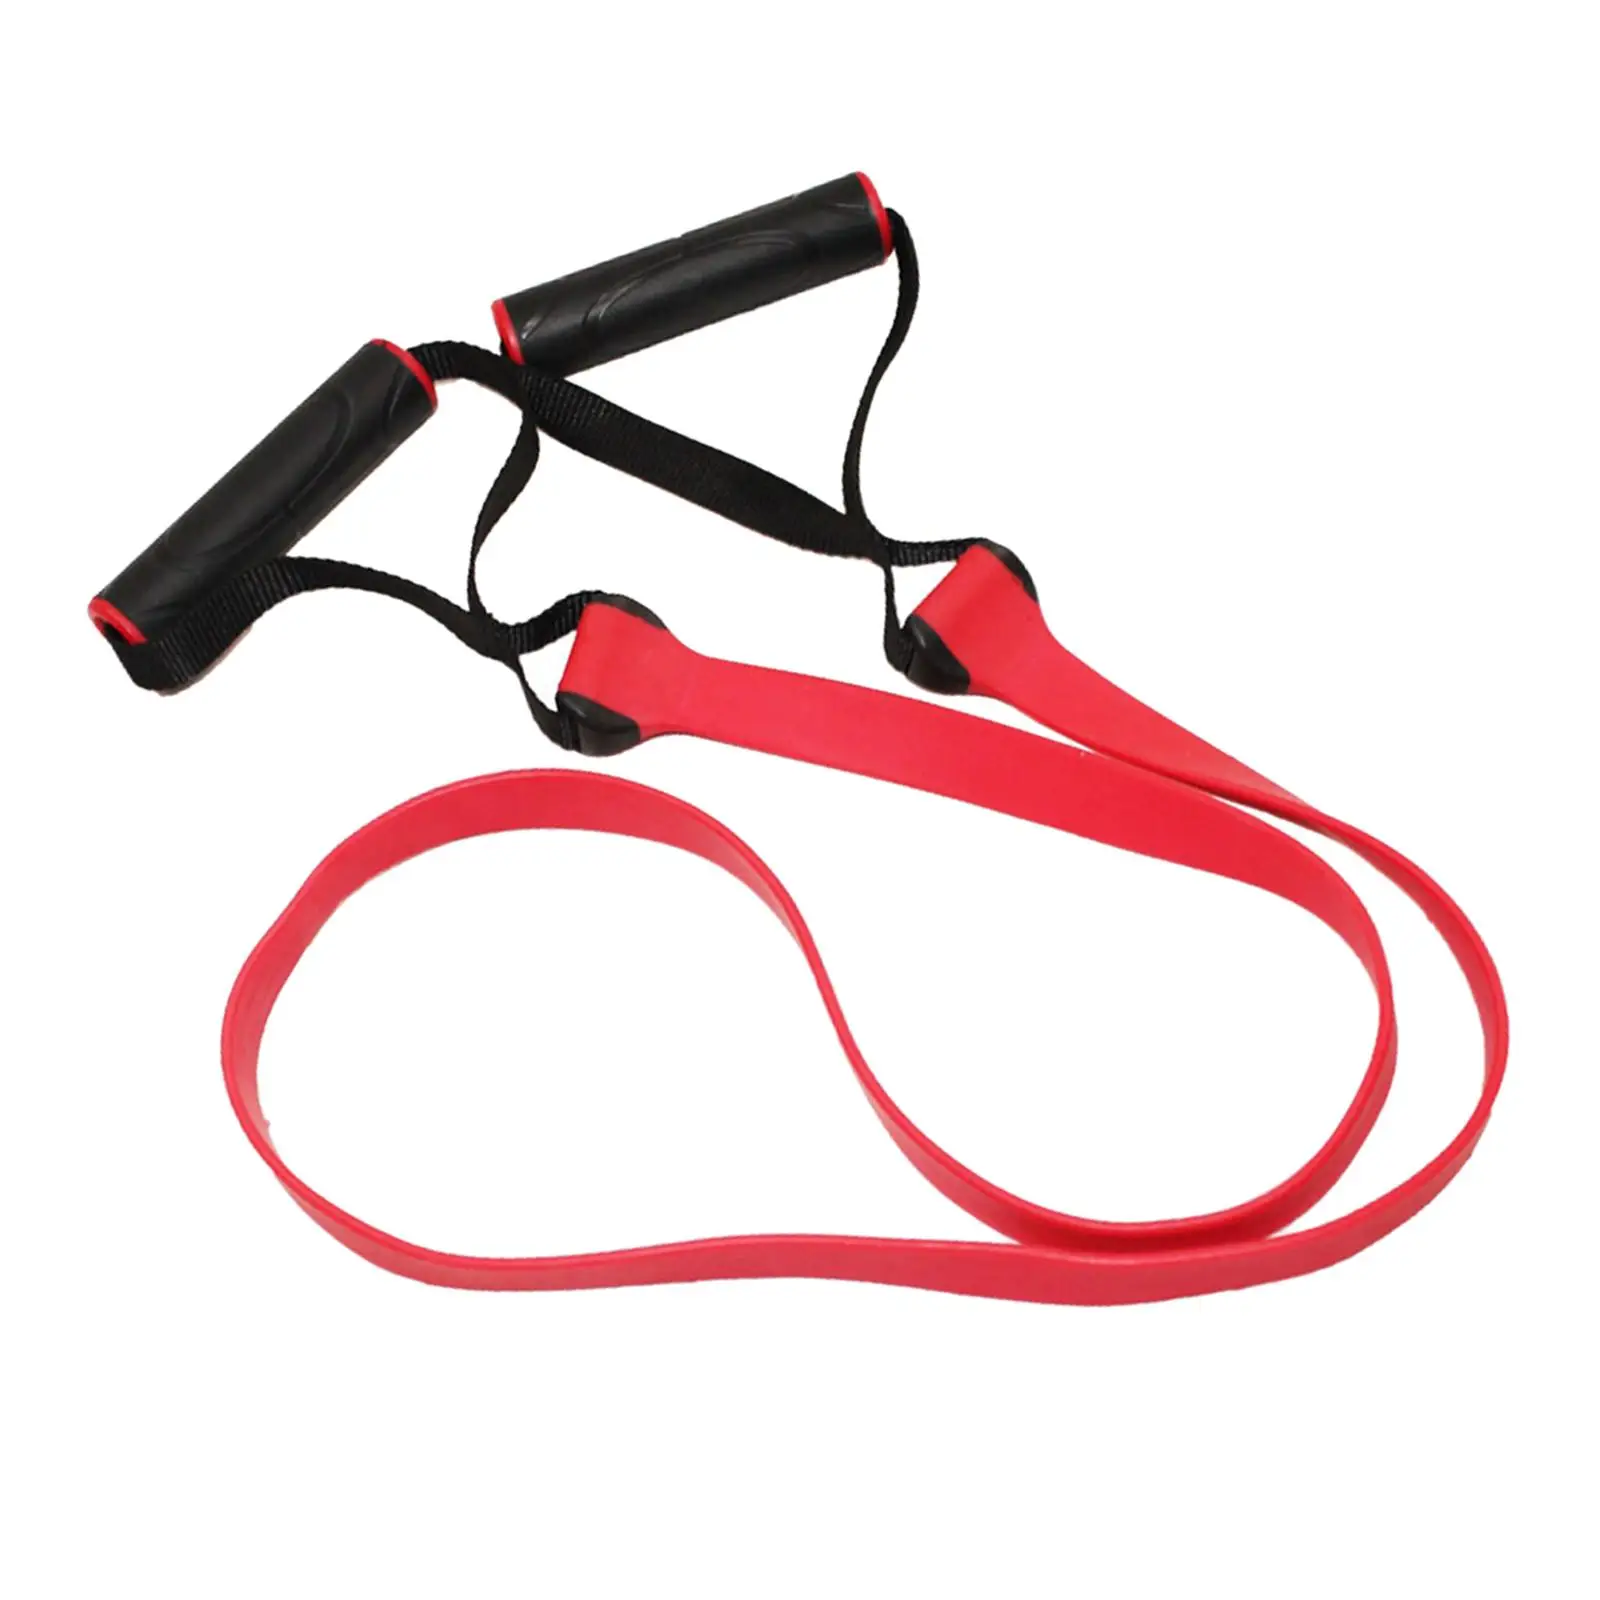 Resistance Bands Handle Tension Rope Women Workout Accessories Expander Tube